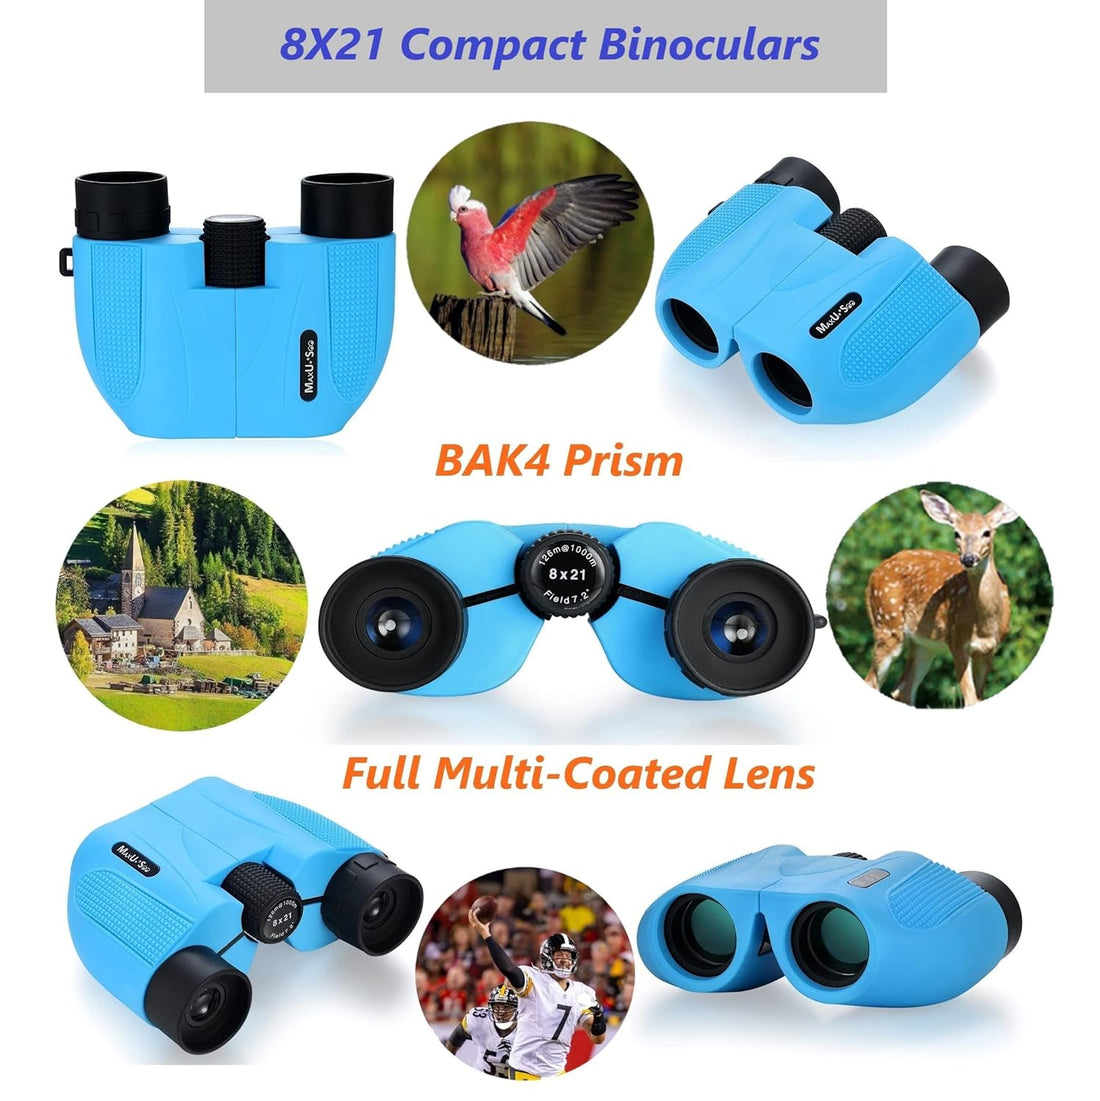 MaxUSee 8X21 Compact Binoculars for Adults and Kids, Easy Focus HD Binoculars for Bird Watching, Travel, Sightseeing, Concerts and Sport Games